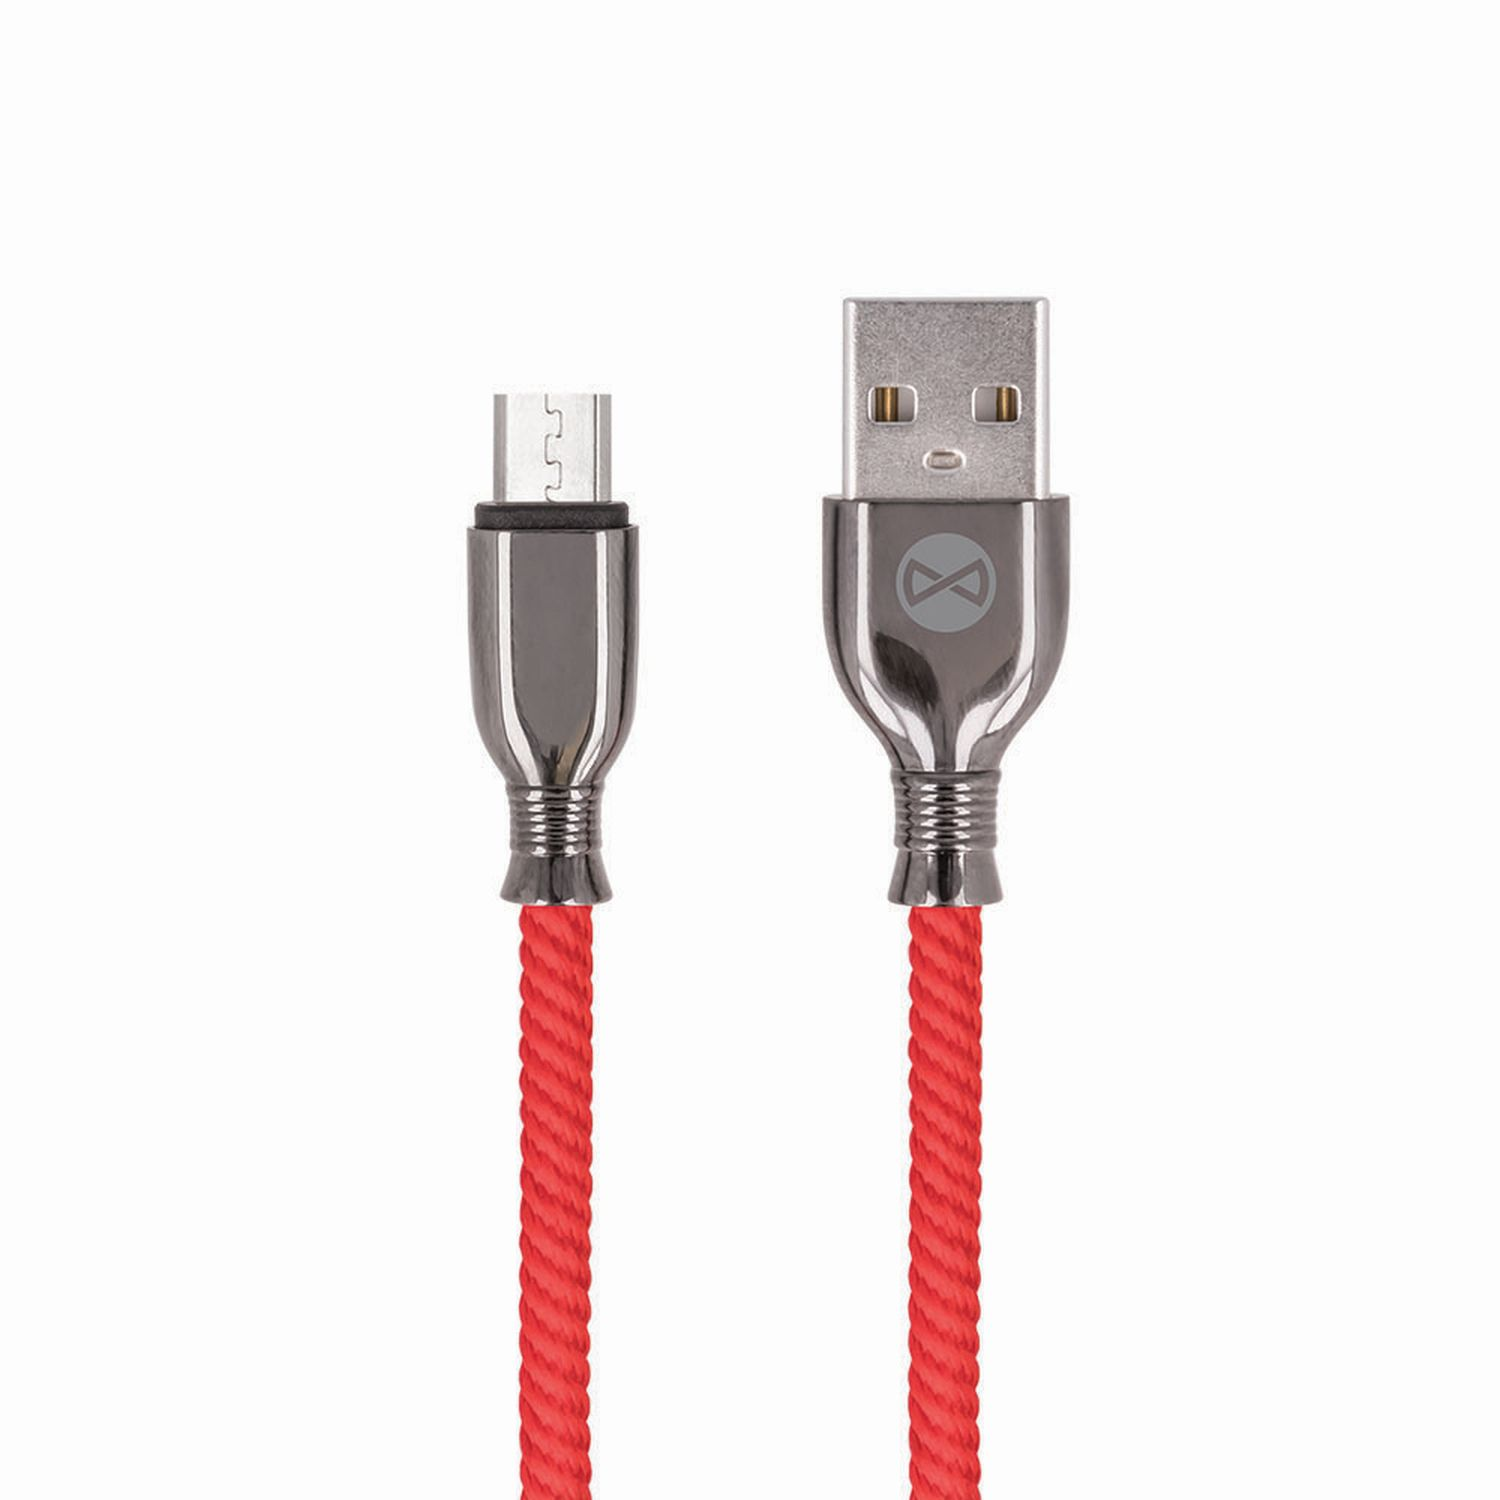 FOREVER Tornado 3A USB Anti Ladekabel, Micro Bruch, Rot